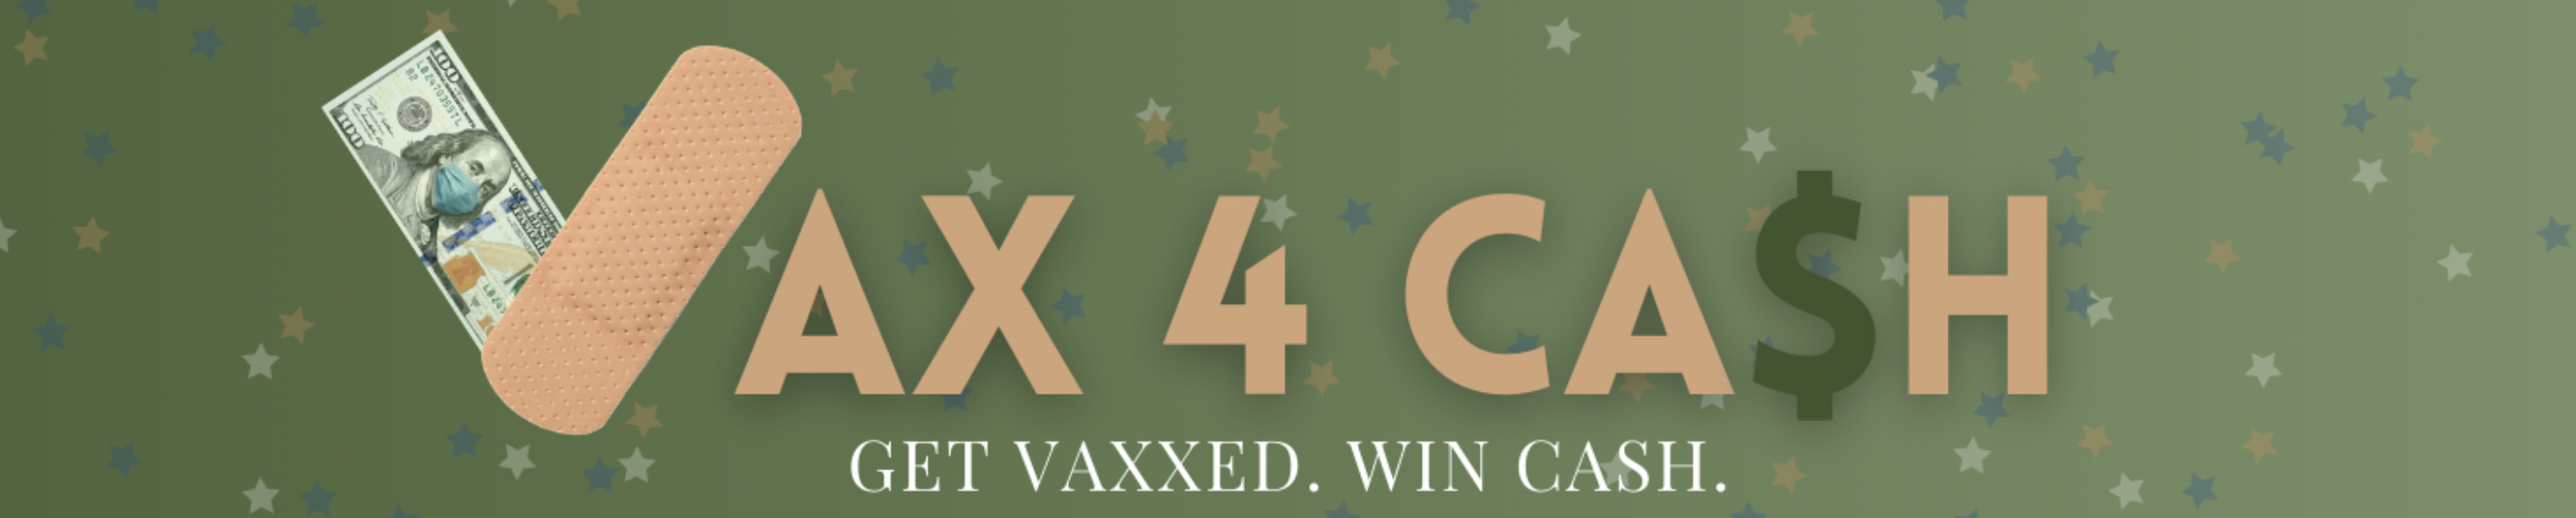 Vax 4 Cash Sweepstakes